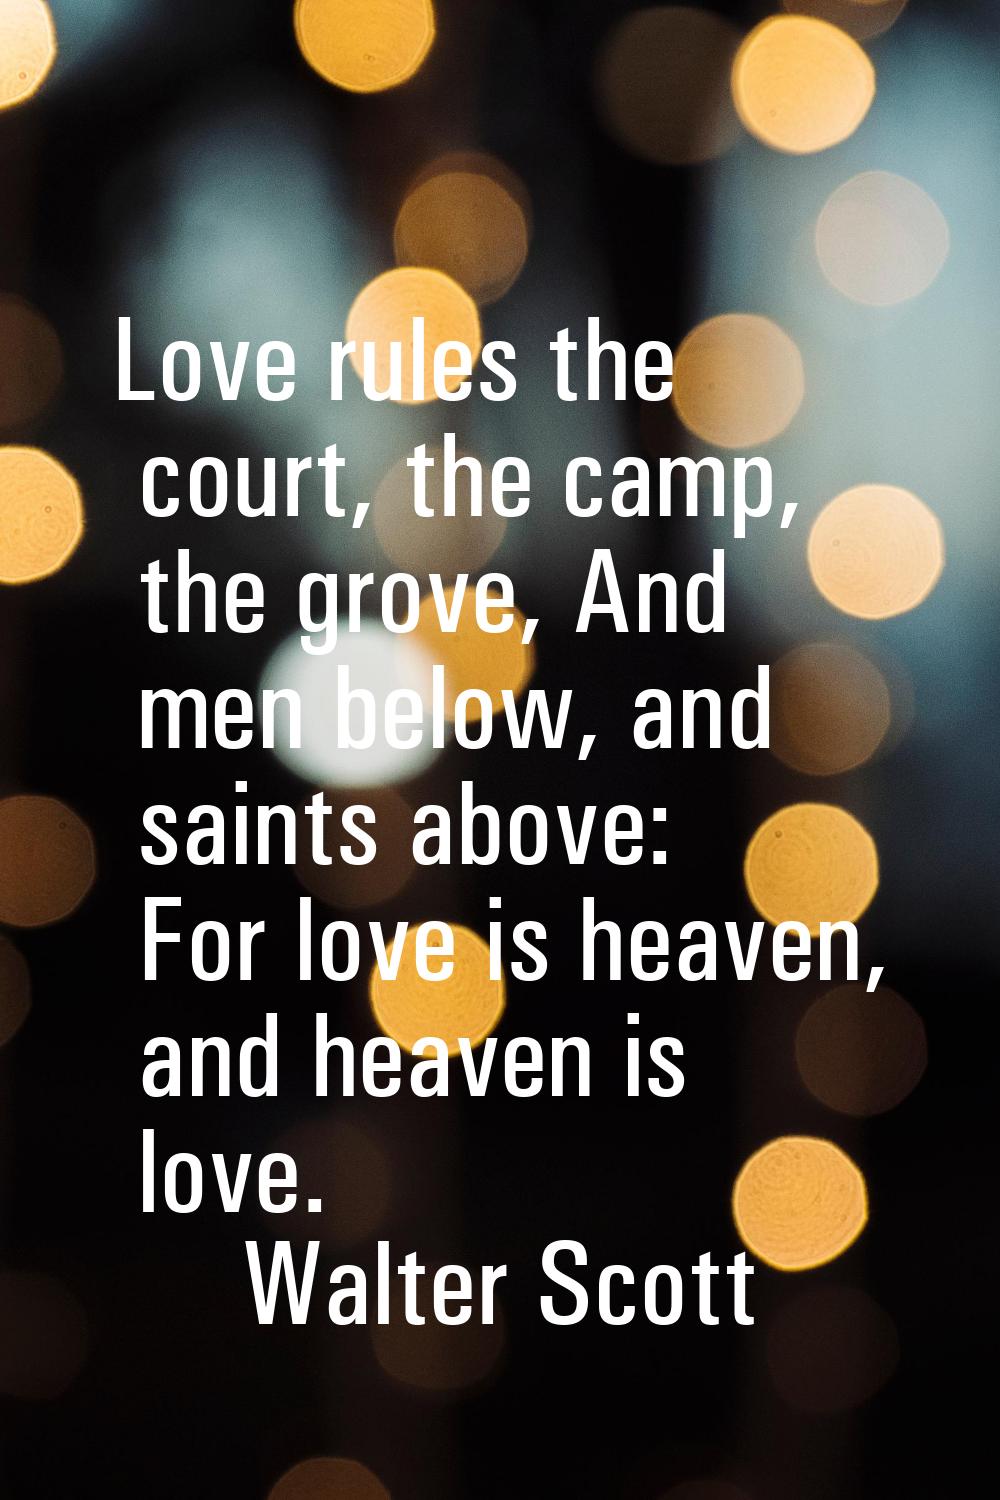 Love rules the court, the camp, the grove, And men below, and saints above: For love is heaven, and